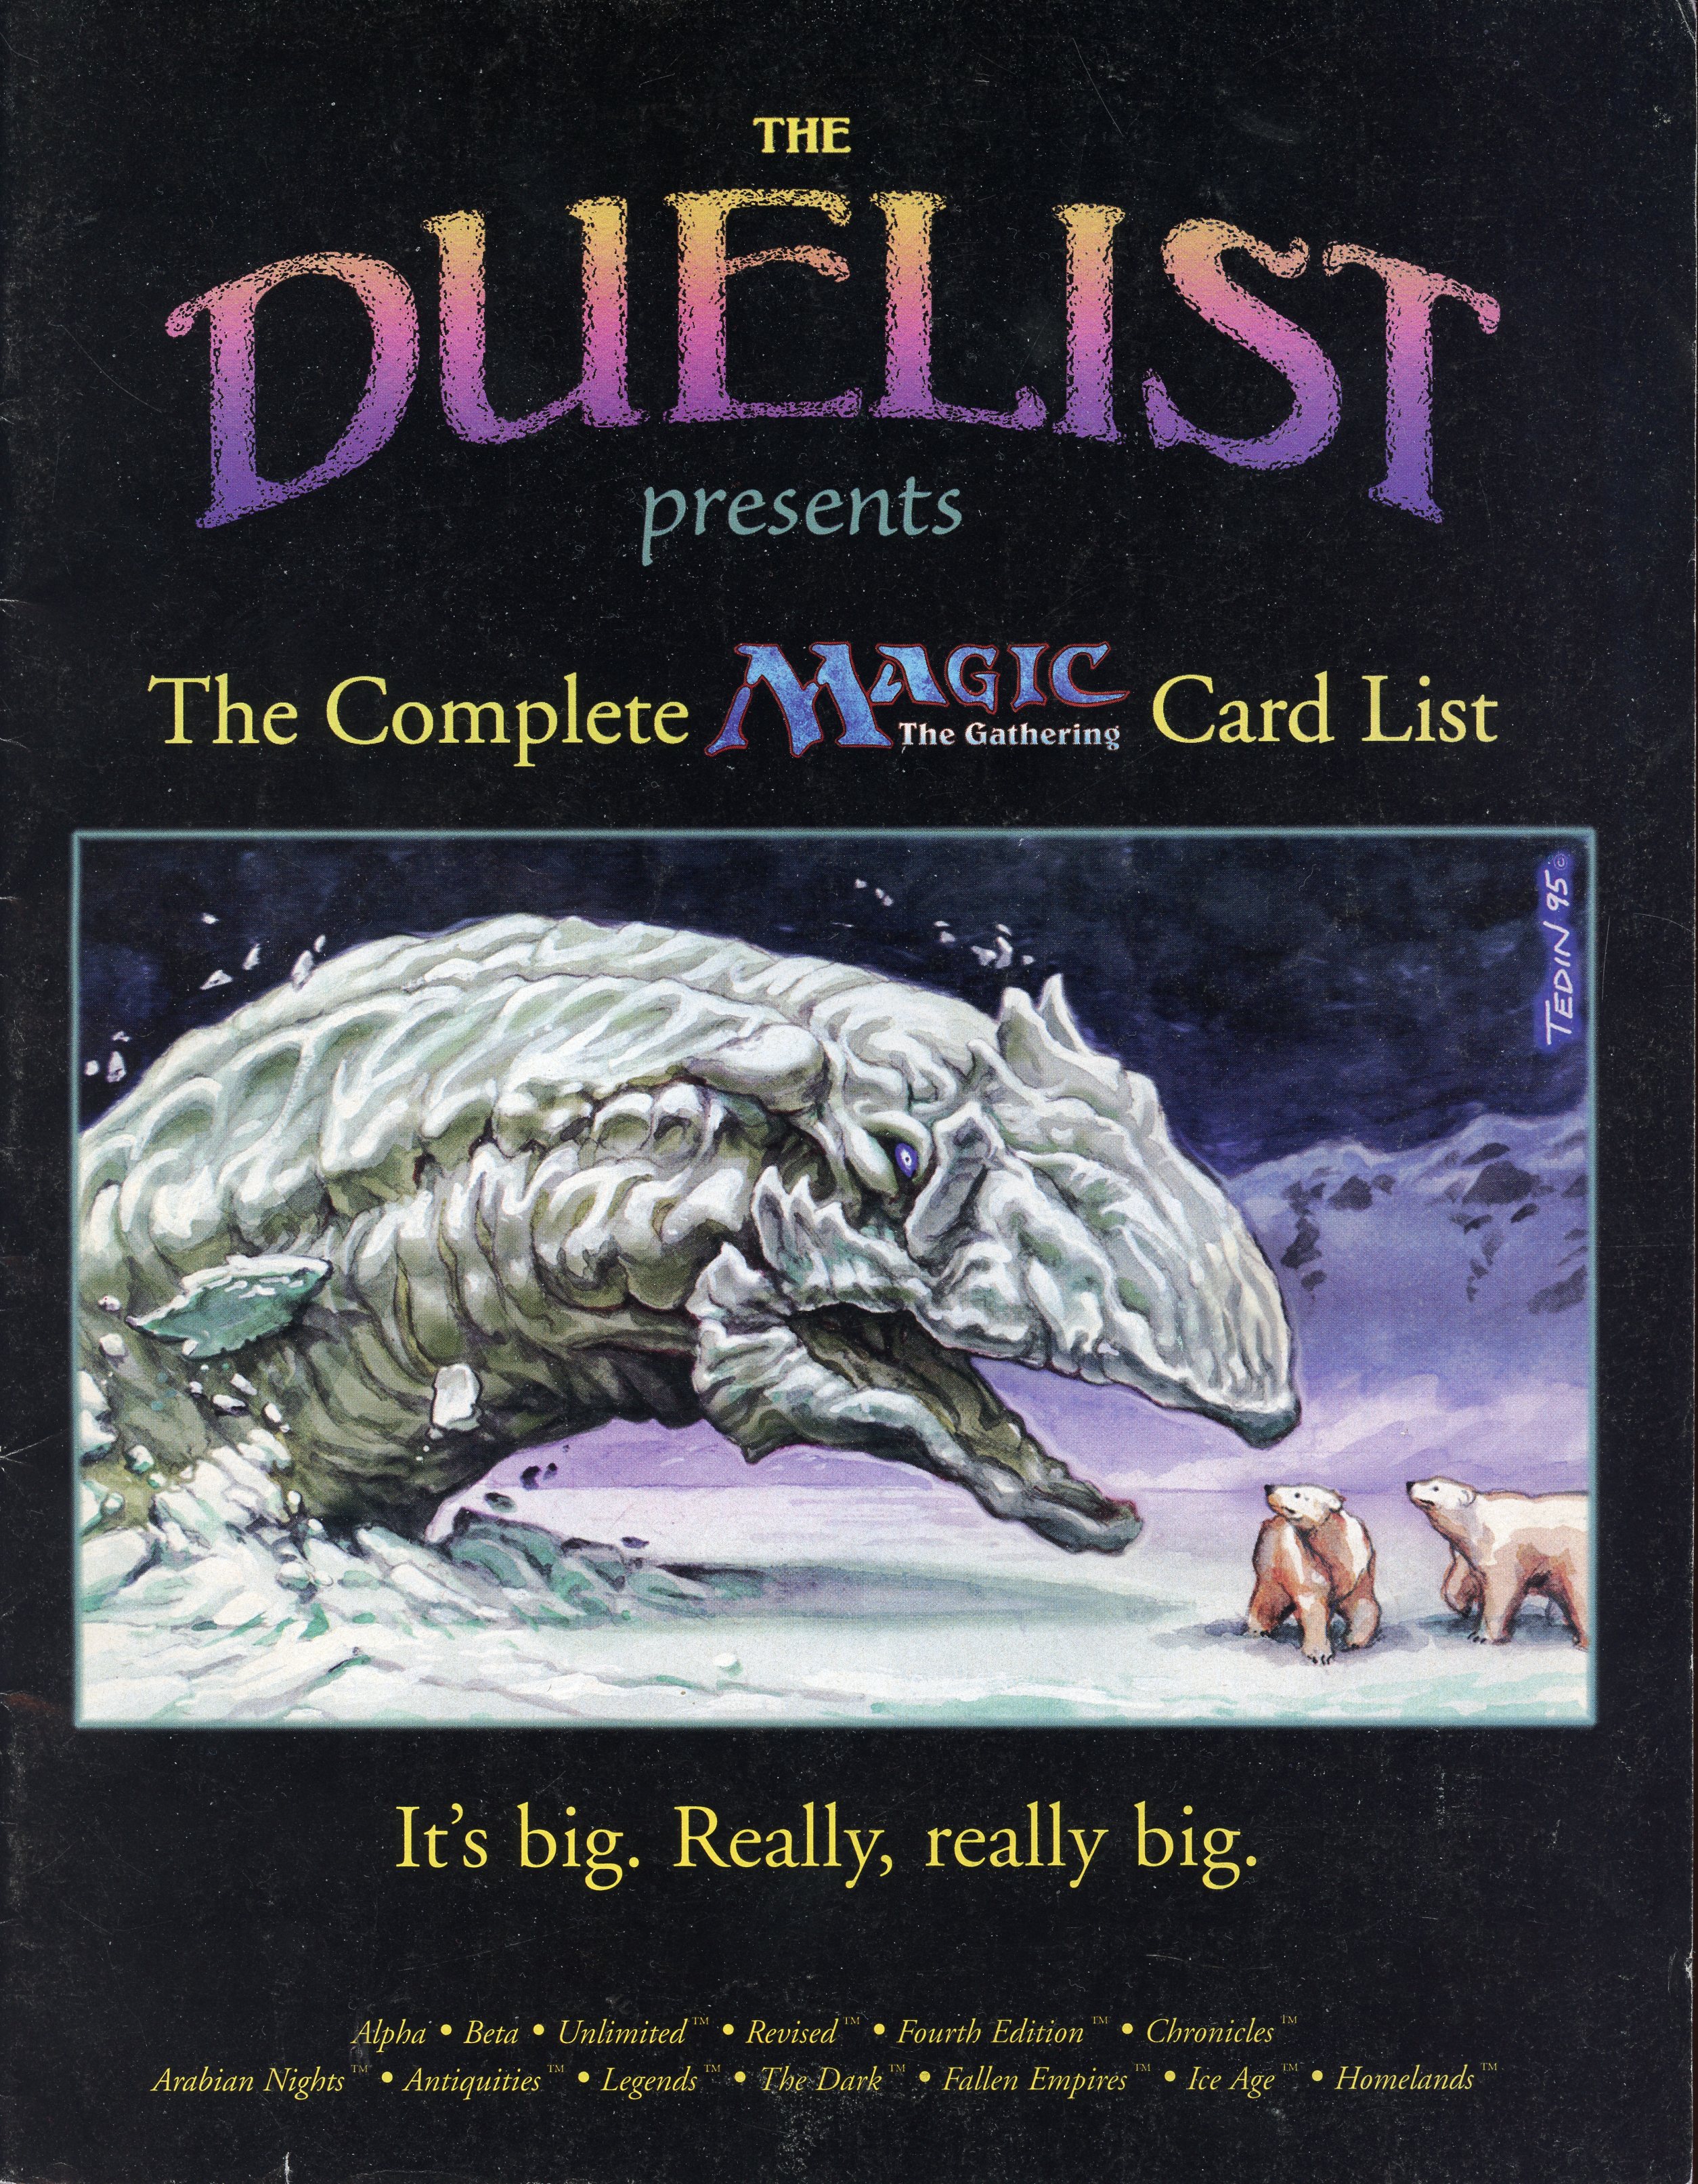 The Duelist Presents The Complete Magic: The Gathering Card List